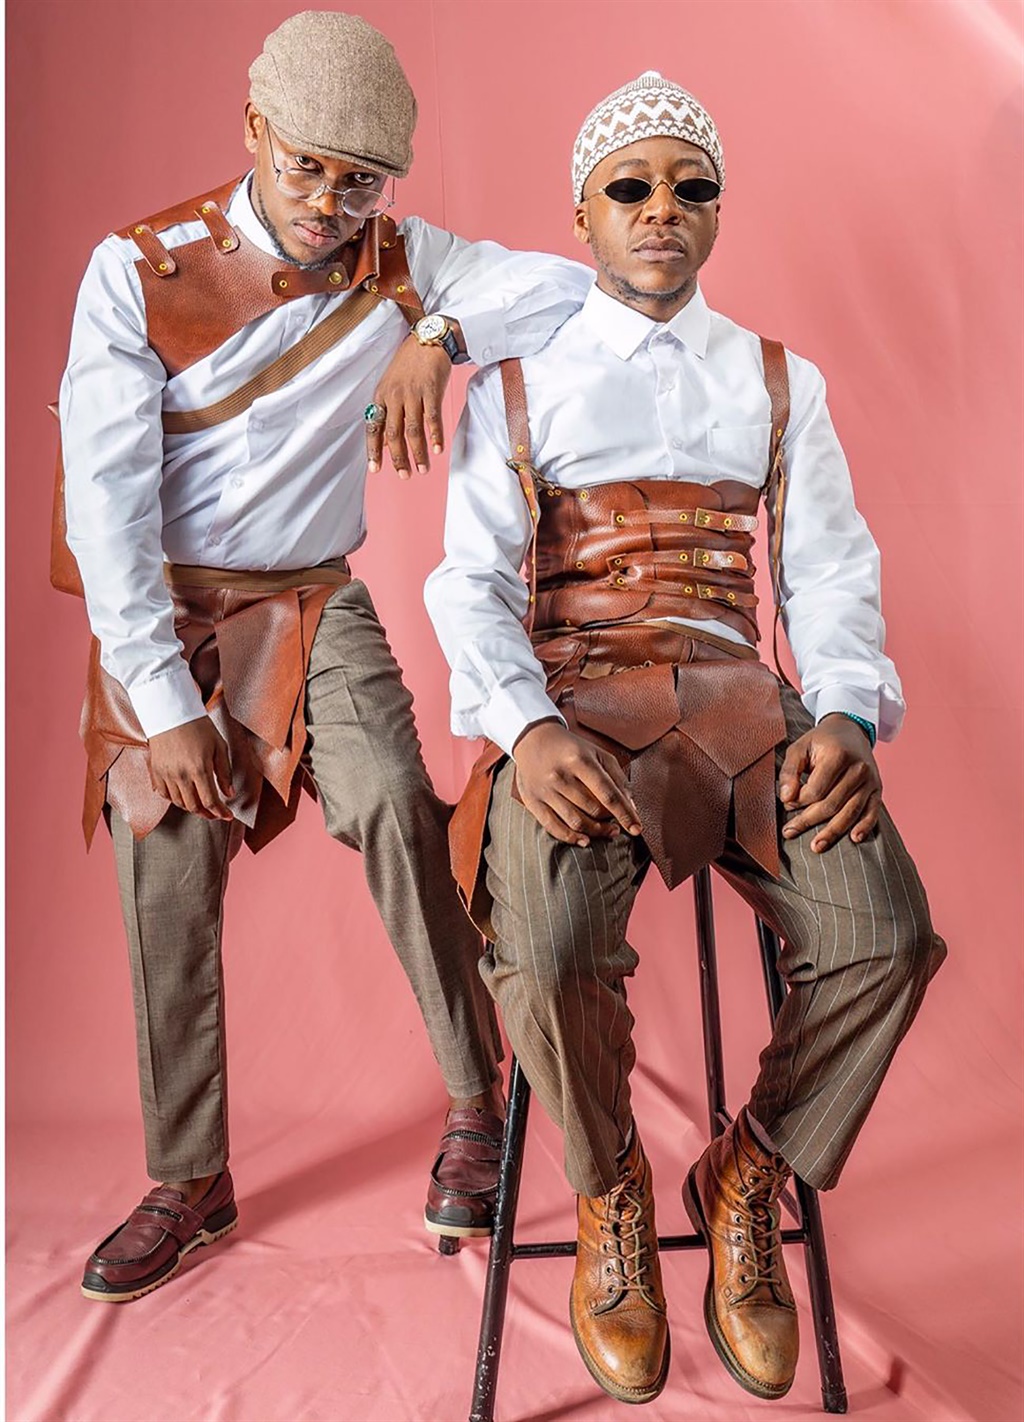 Black Motion's latest album causes chaos with fans